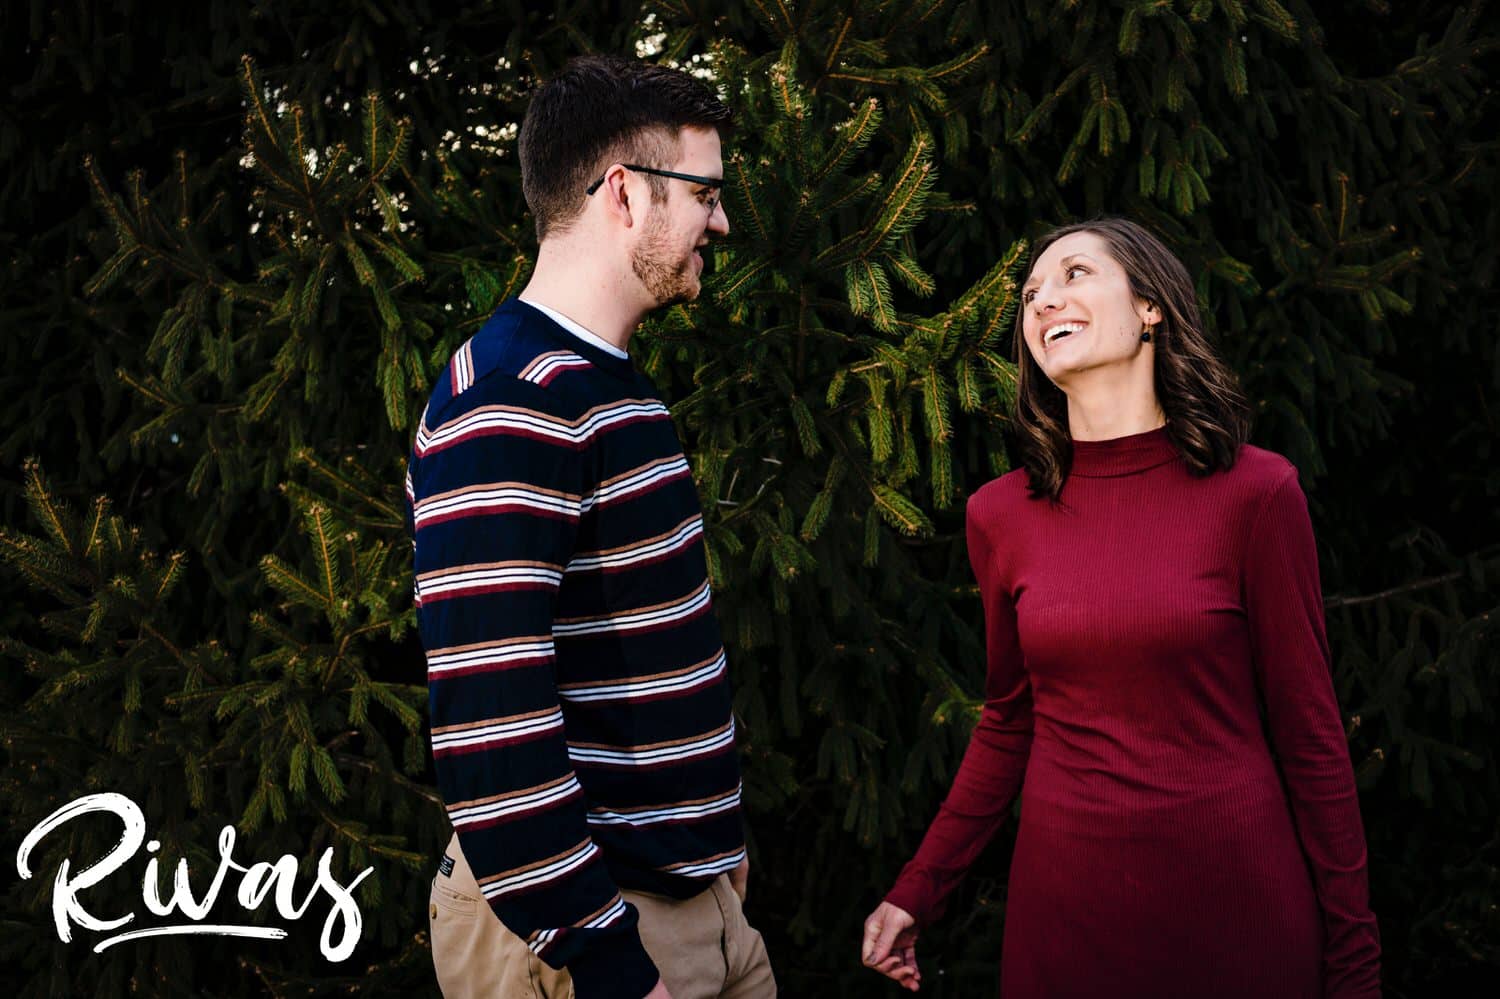 A colorful, candid picture of an engaged couple laughing together in front of a wall of green trees during their winter engagement session at The Nelson Atkins Museum of Art.